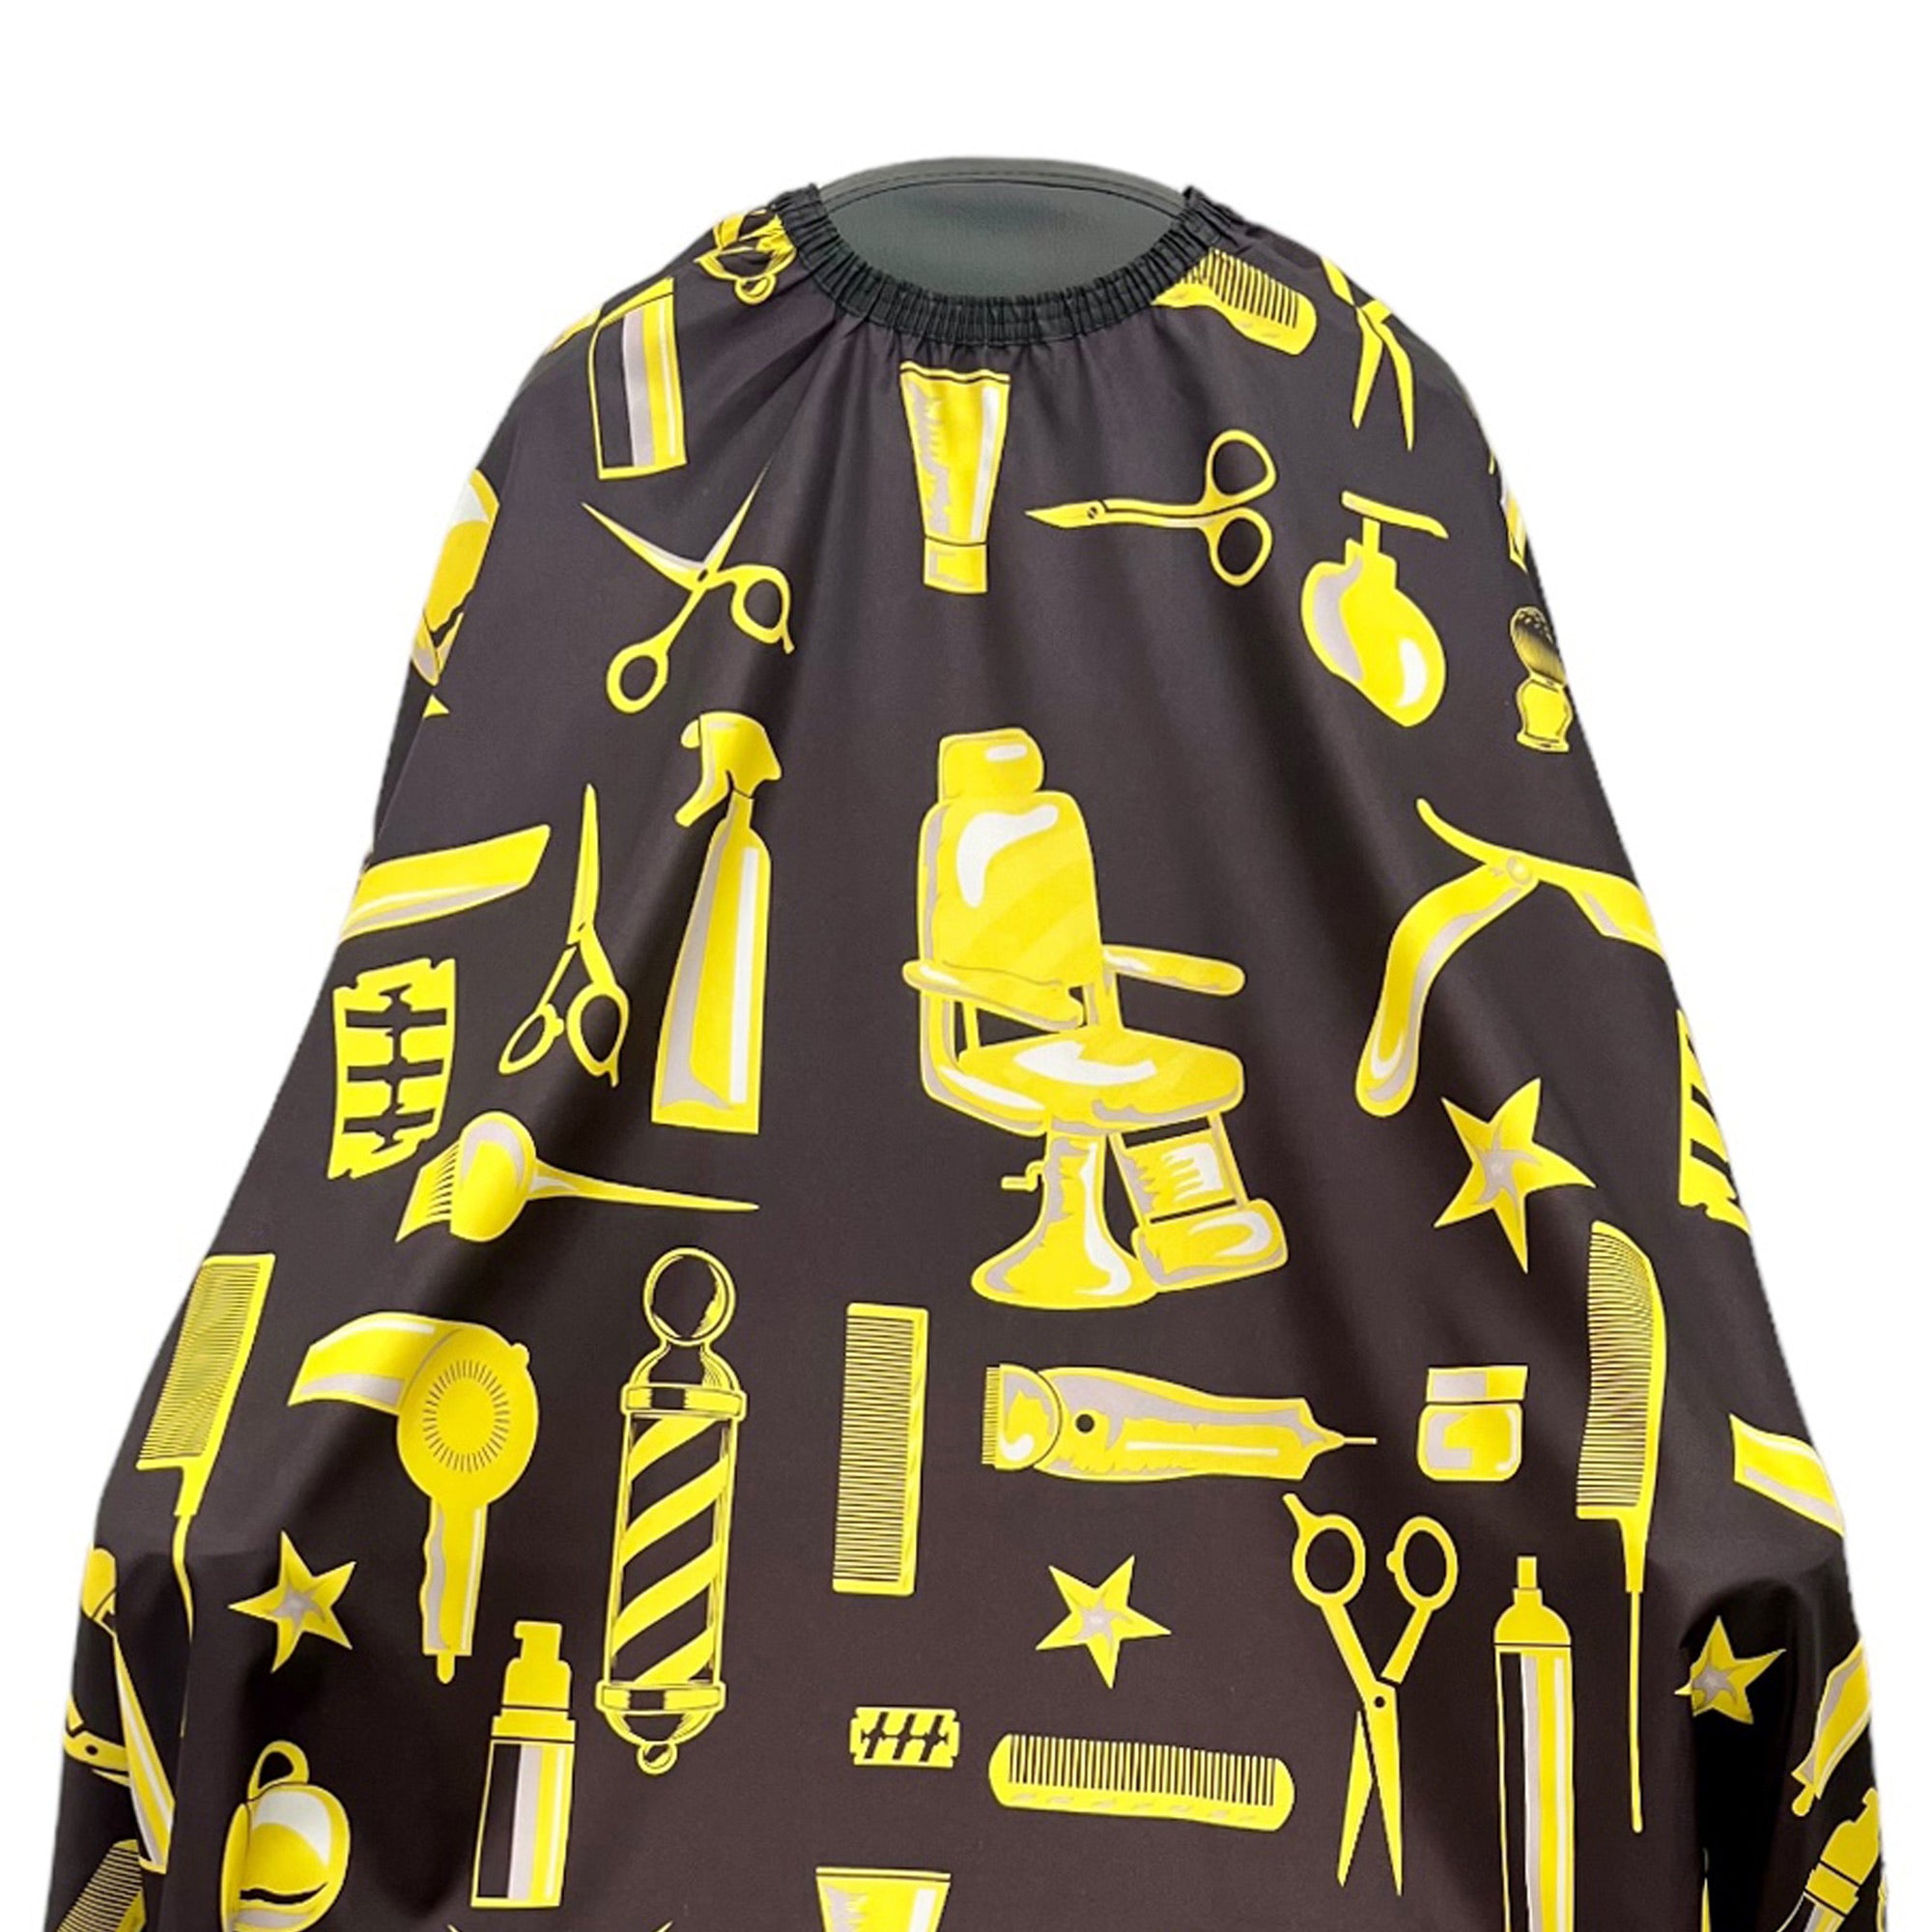 Gabri - Barber Hairdressing Hair Cutting Cape & Gown Tools Pattern (Black & Yellow)